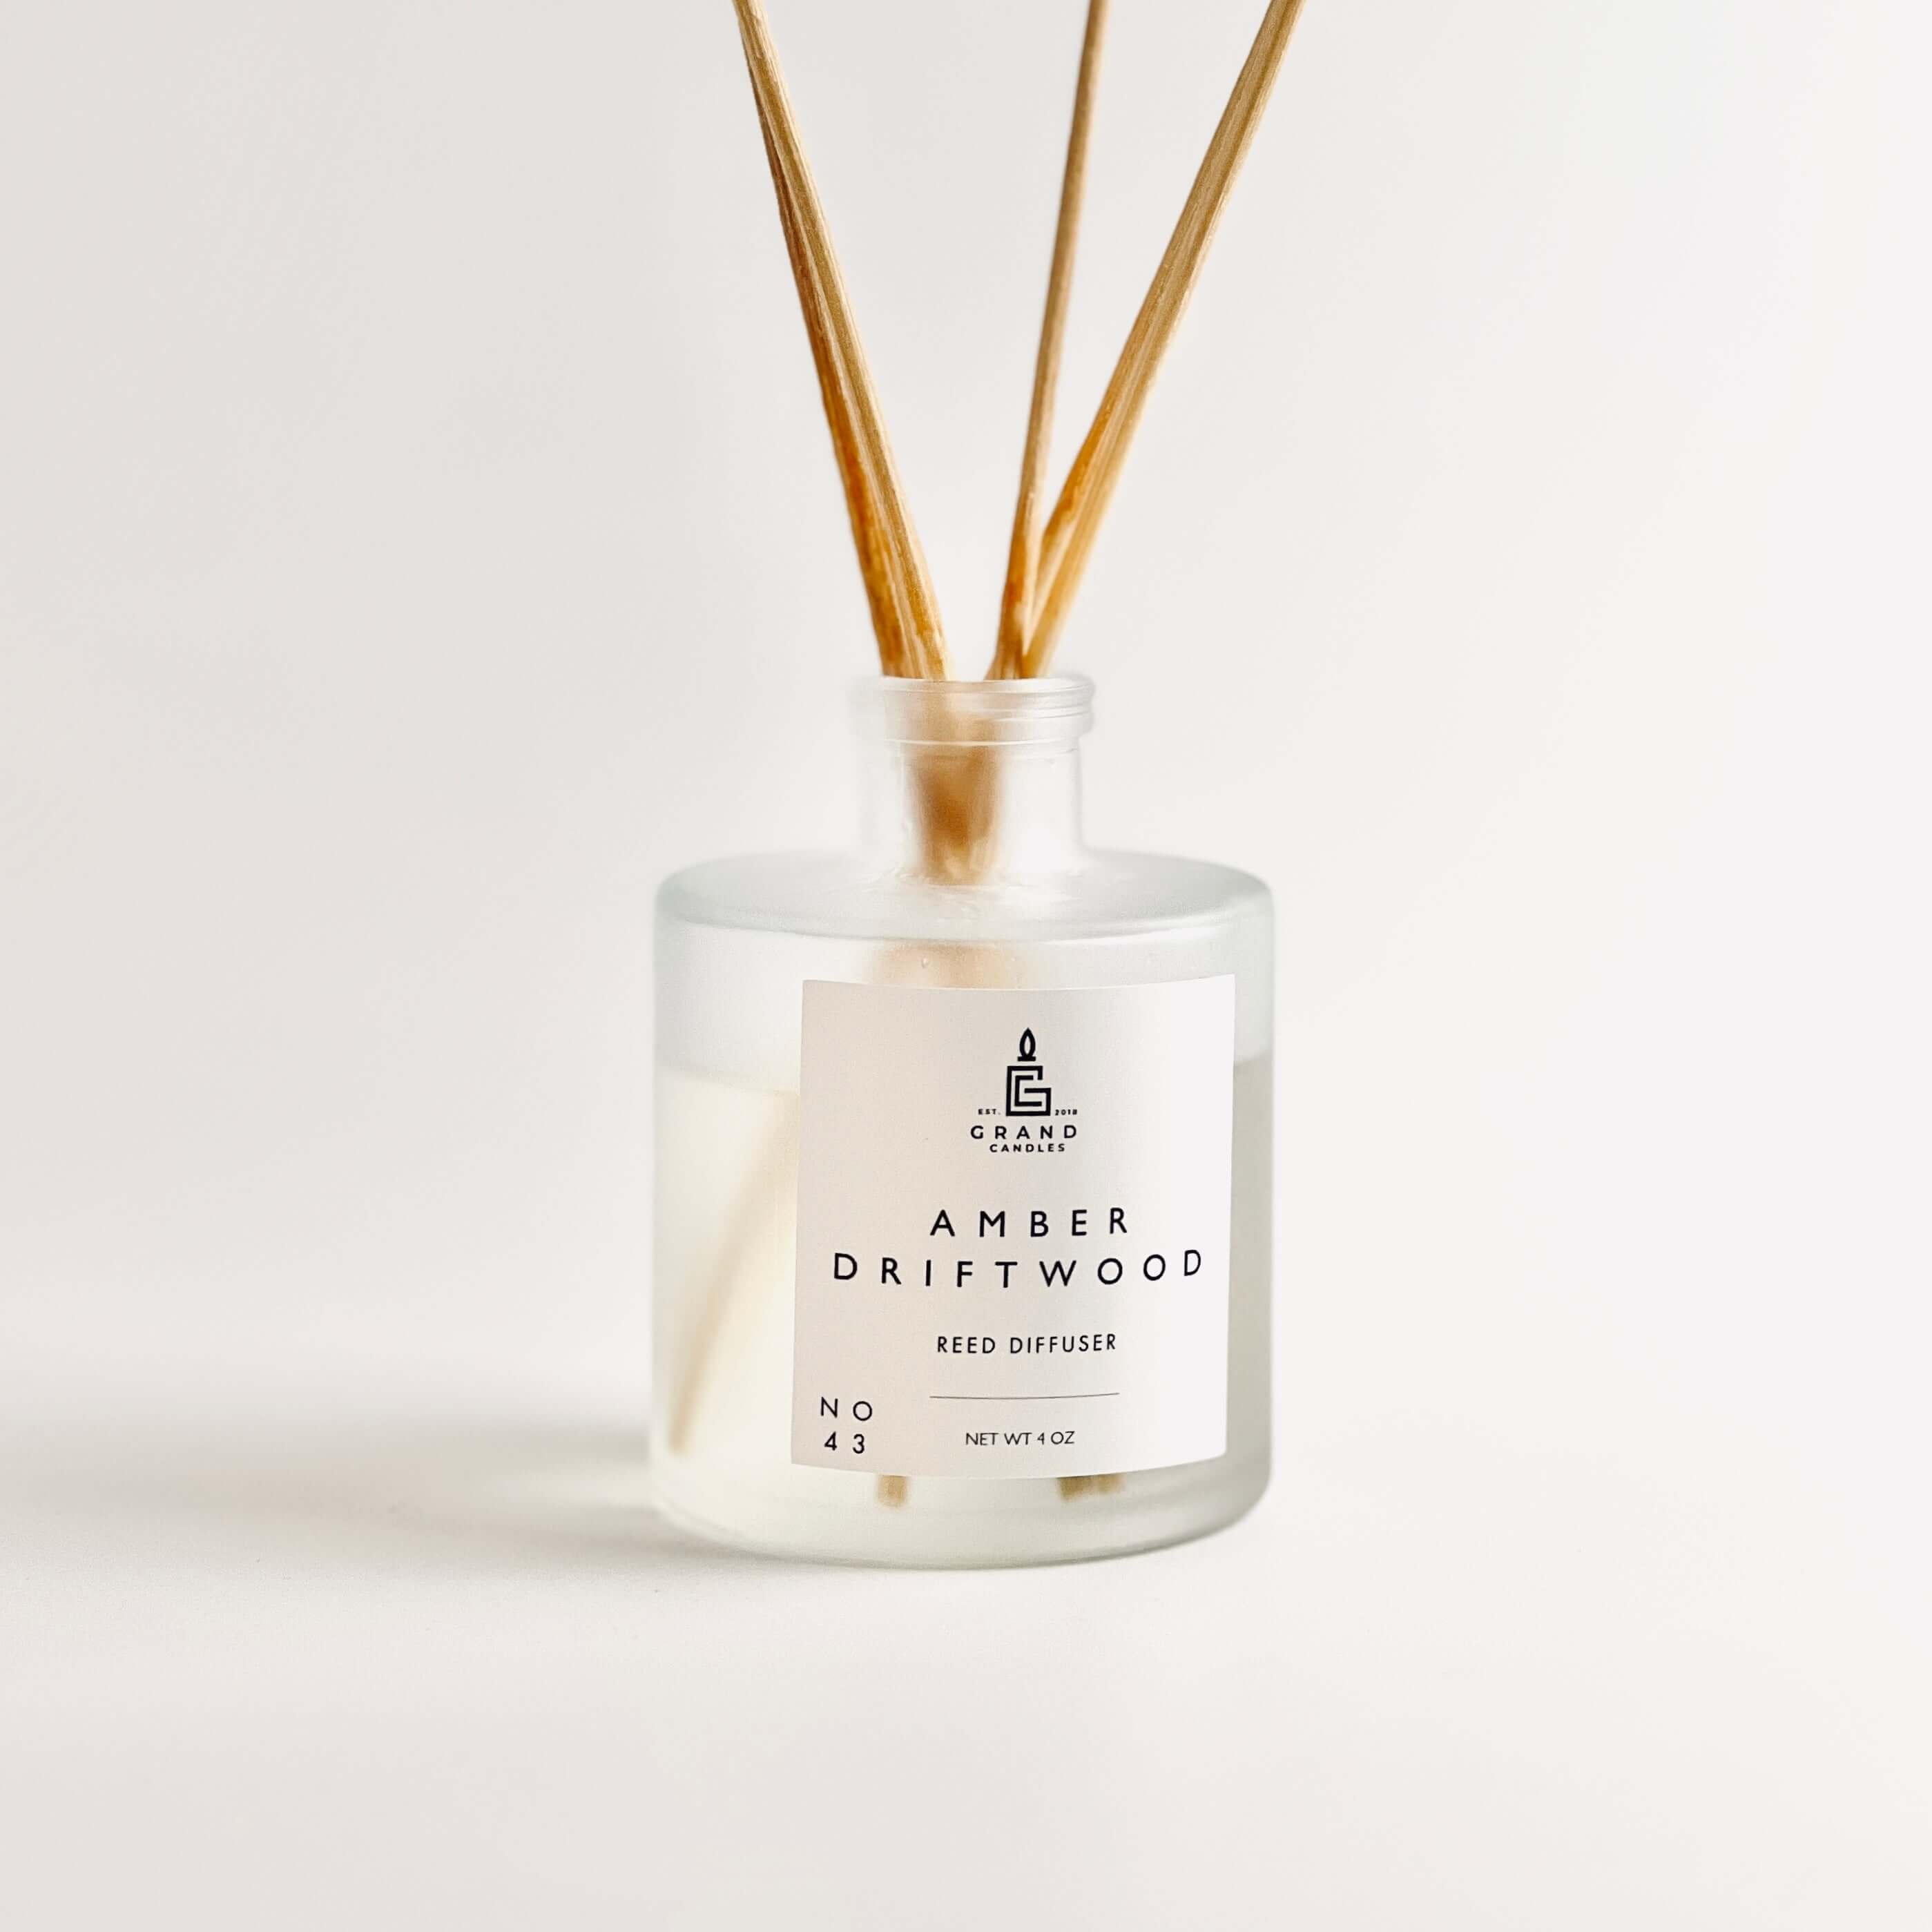 Amber Driftwood Reed Diffuser